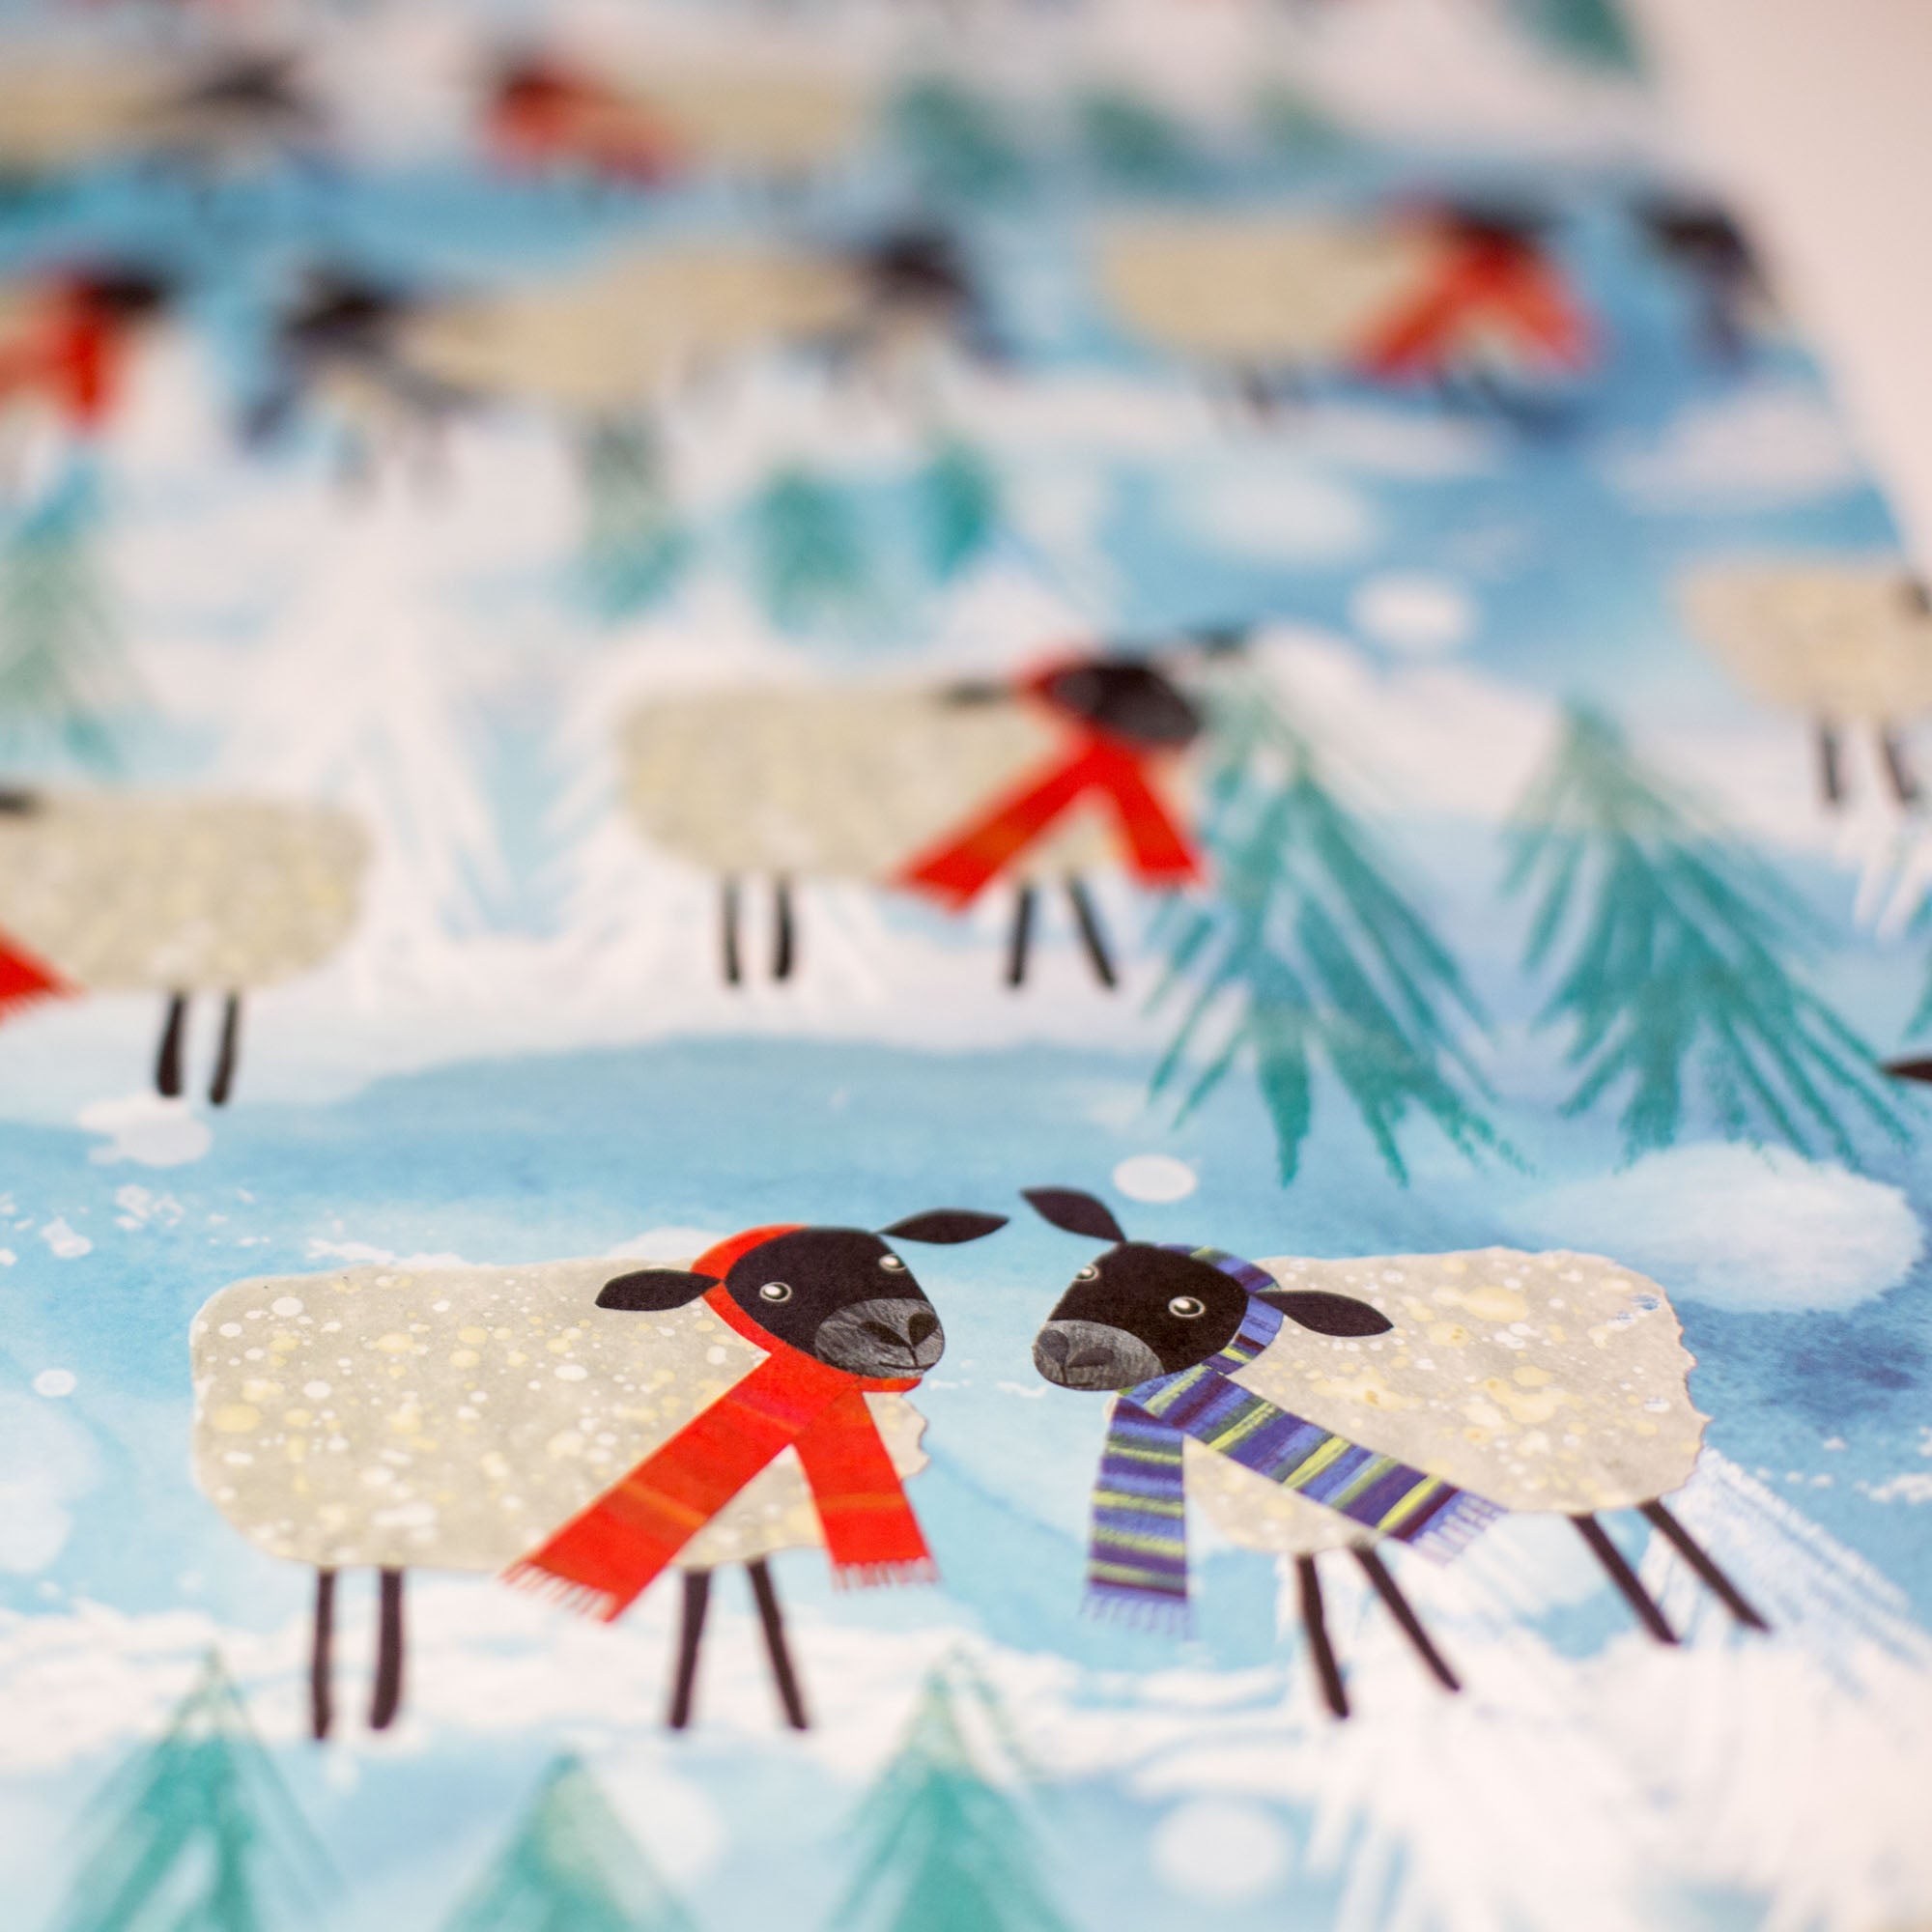 Close up view of the wrapping paper. In focus are two black-headed sheep facing each other. One wears a red scarf while the other wears a purple toned striped scarf. The background is blue with Christmas trees and snow dispersed between the cheery characters.